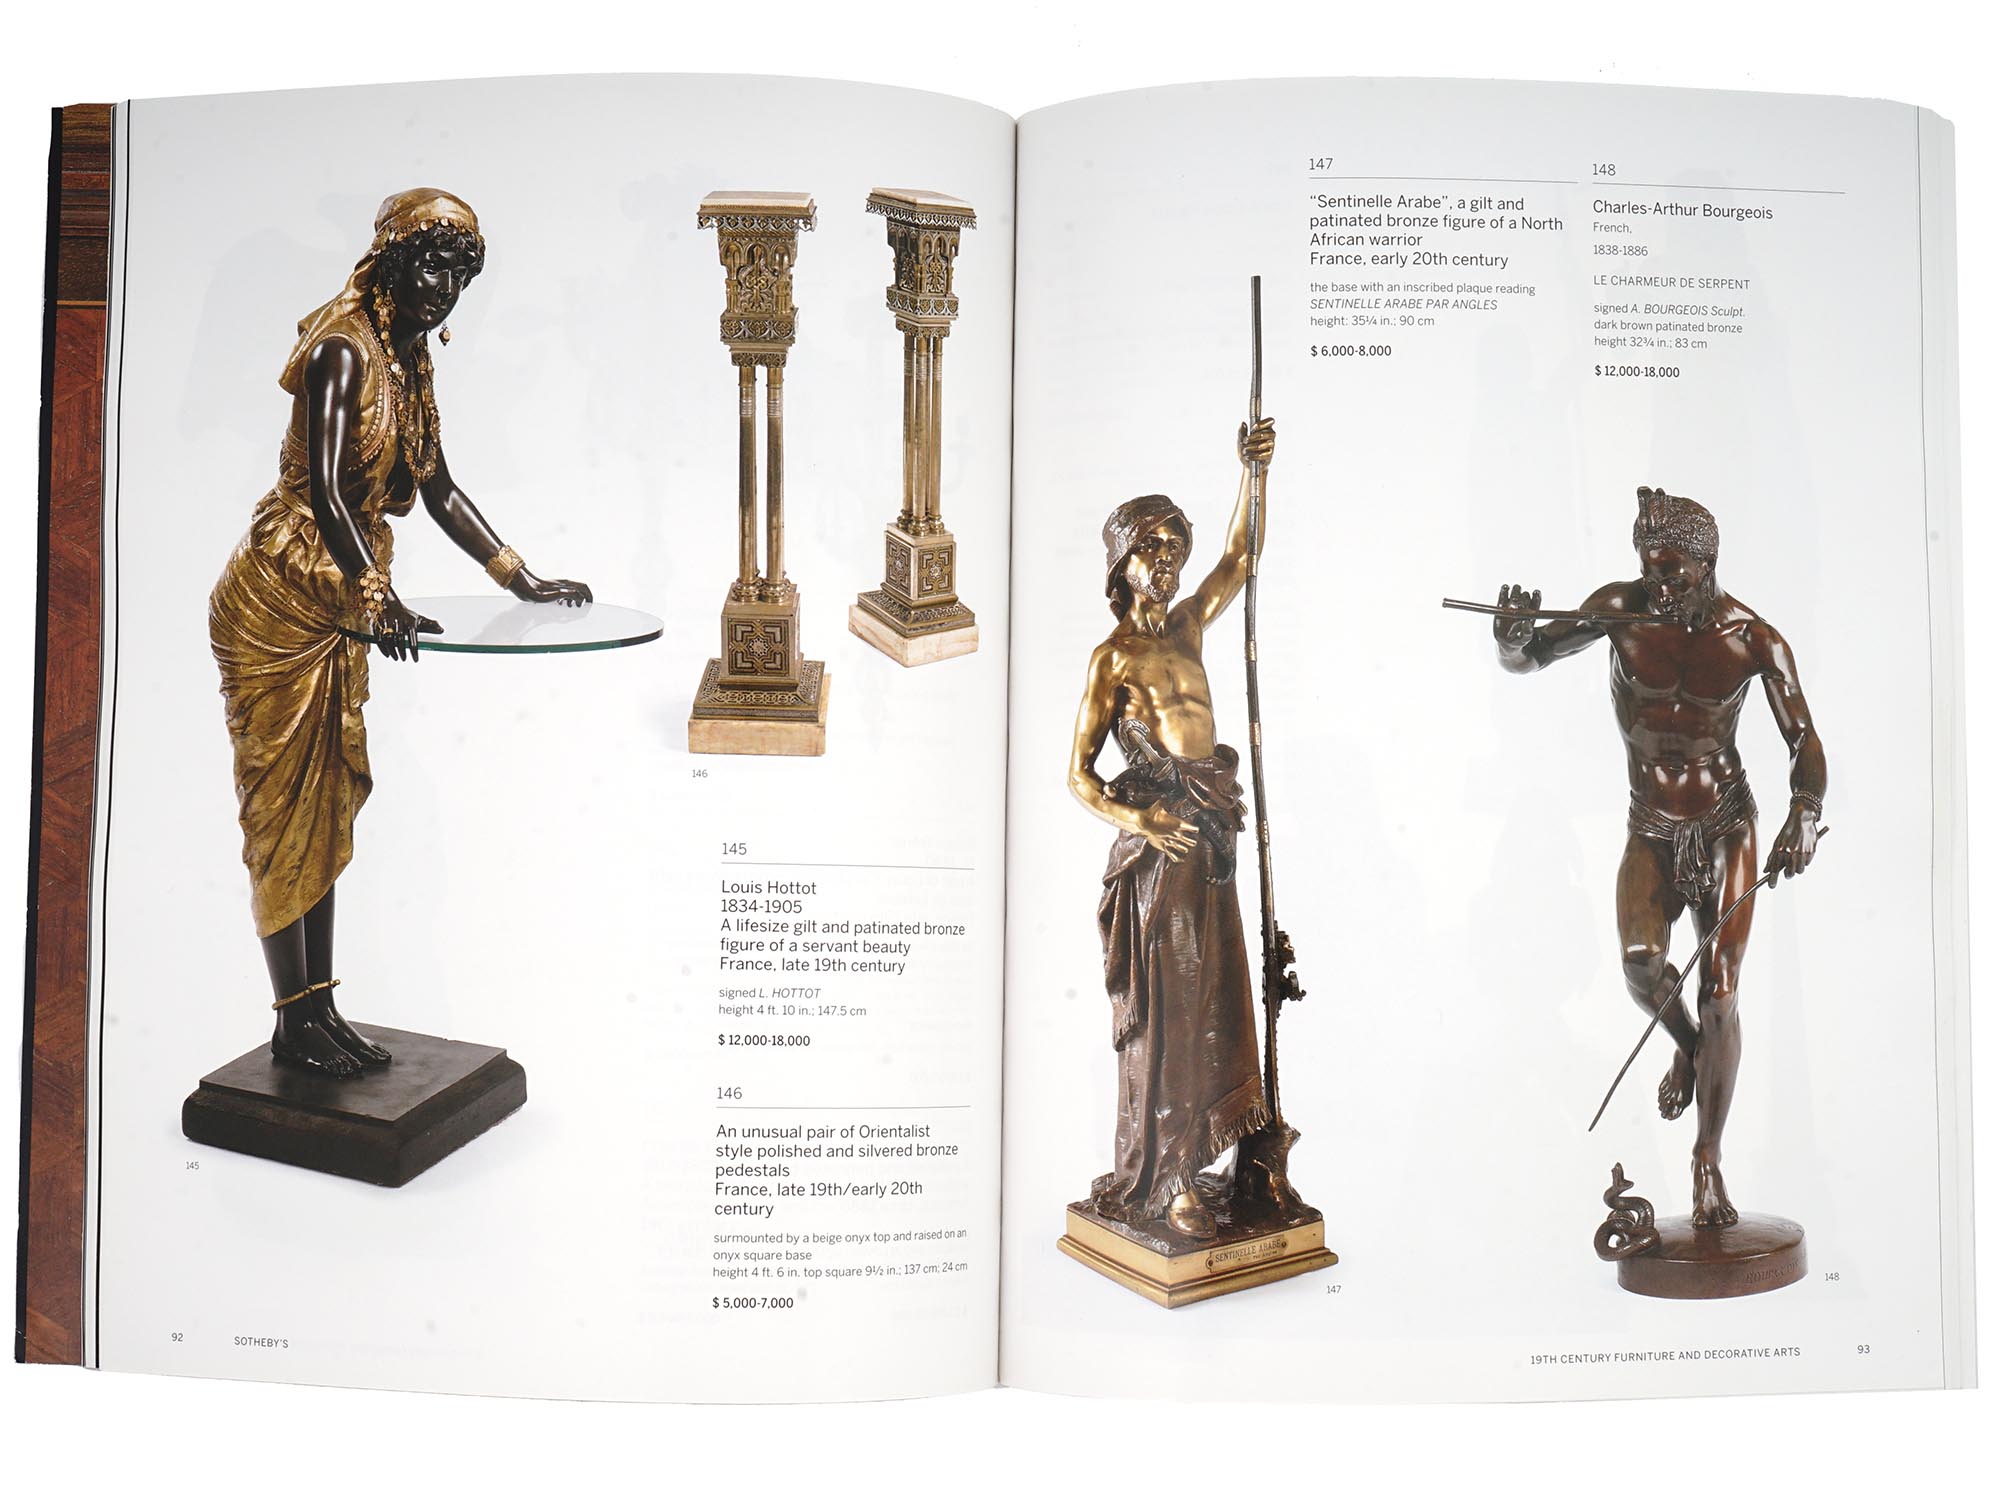 GROUP OF AMERICAN EUROPEAN ART AUCTION CATALOGS PIC-5